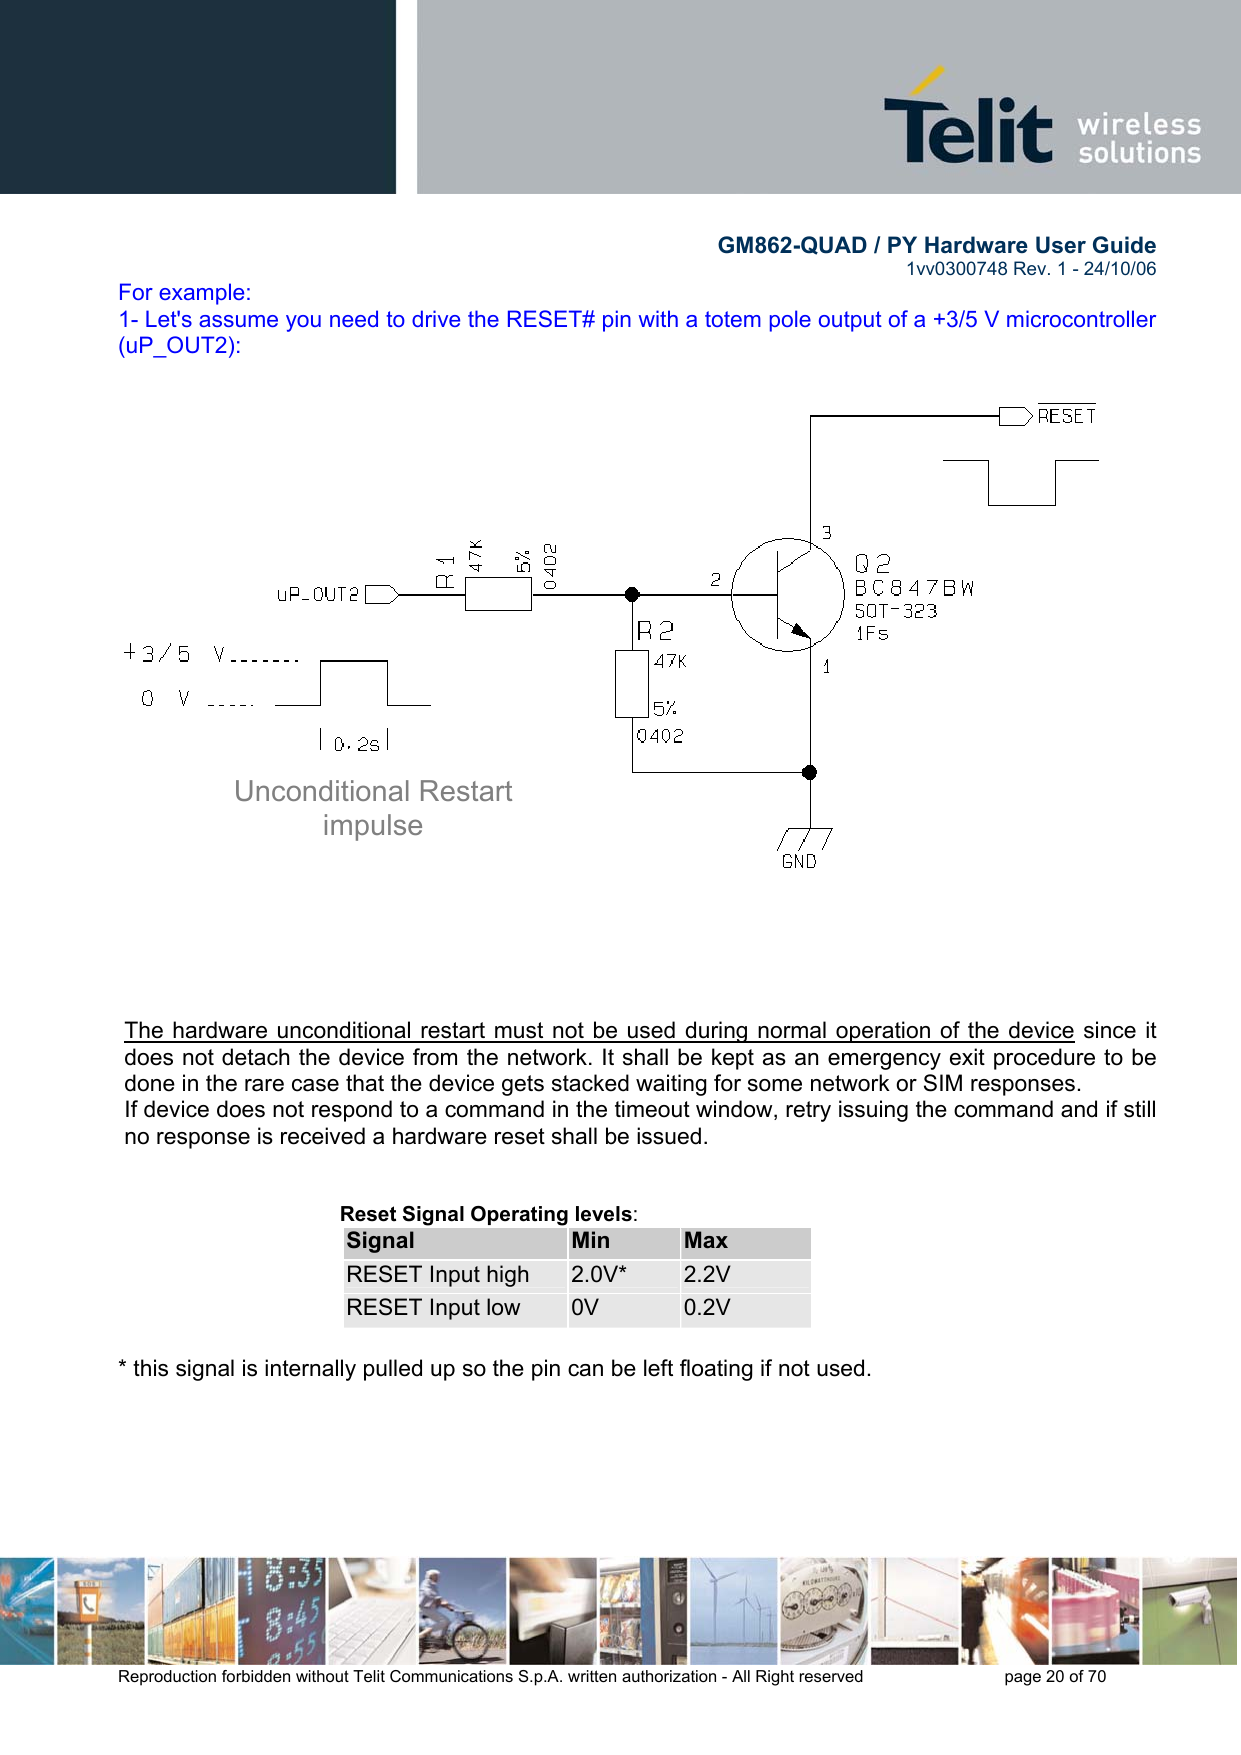        GM862-QUAD / PY Hardware User Guide   1vv0300748 Rev. 1 - 24/10/06    Reproduction forbidden without Telit Communications S.p.A. written authorization - All Right reserved    page 20 of 70  For example: 1- Let&apos;s assume you need to drive the RESET# pin with a totem pole output of a +3/5 V microcontroller (uP_OUT2):                          The hardware unconditional restart must not be used during normal operation of the device since it does not detach the device from the network. It shall be kept as an emergency exit procedure to be done in the rare case that the device gets stacked waiting for some network or SIM responses. If device does not respond to a command in the timeout window, retry issuing the command and if still no response is received a hardware reset shall be issued.   Reset Signal Operating levels: Signal  Min  Max RESET Input high  2.0V*  2.2V RESET Input low  0V  0.2V  * this signal is internally pulled up so the pin can be left floating if not used. Unconditional Restart impulse 